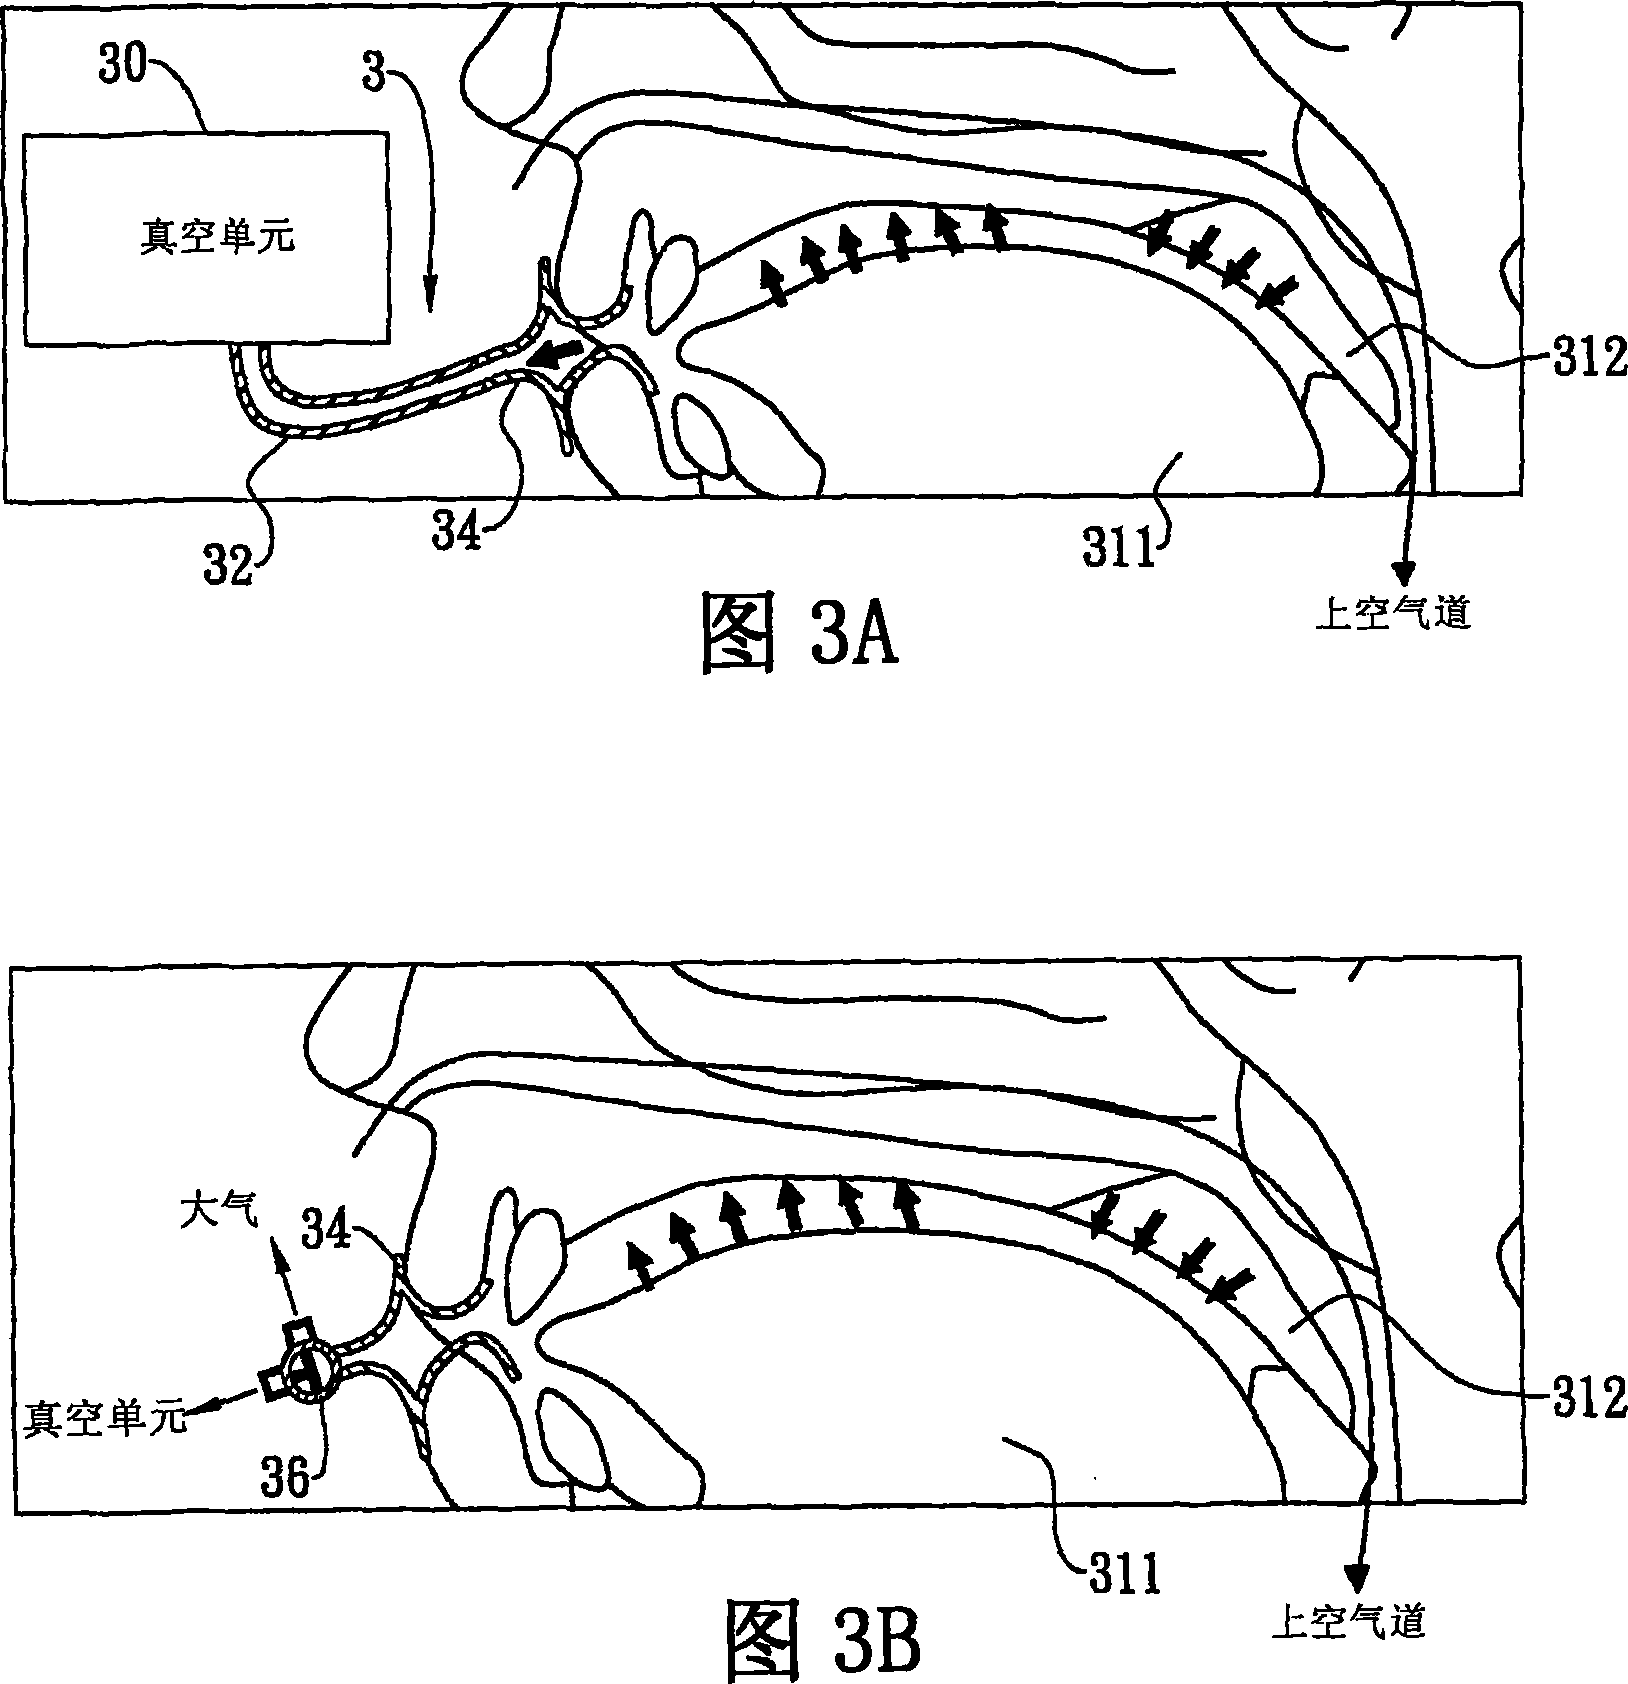 Method and device for treating patients with obstructive sleep apnea by applying negative pressure in oral cavity to patient